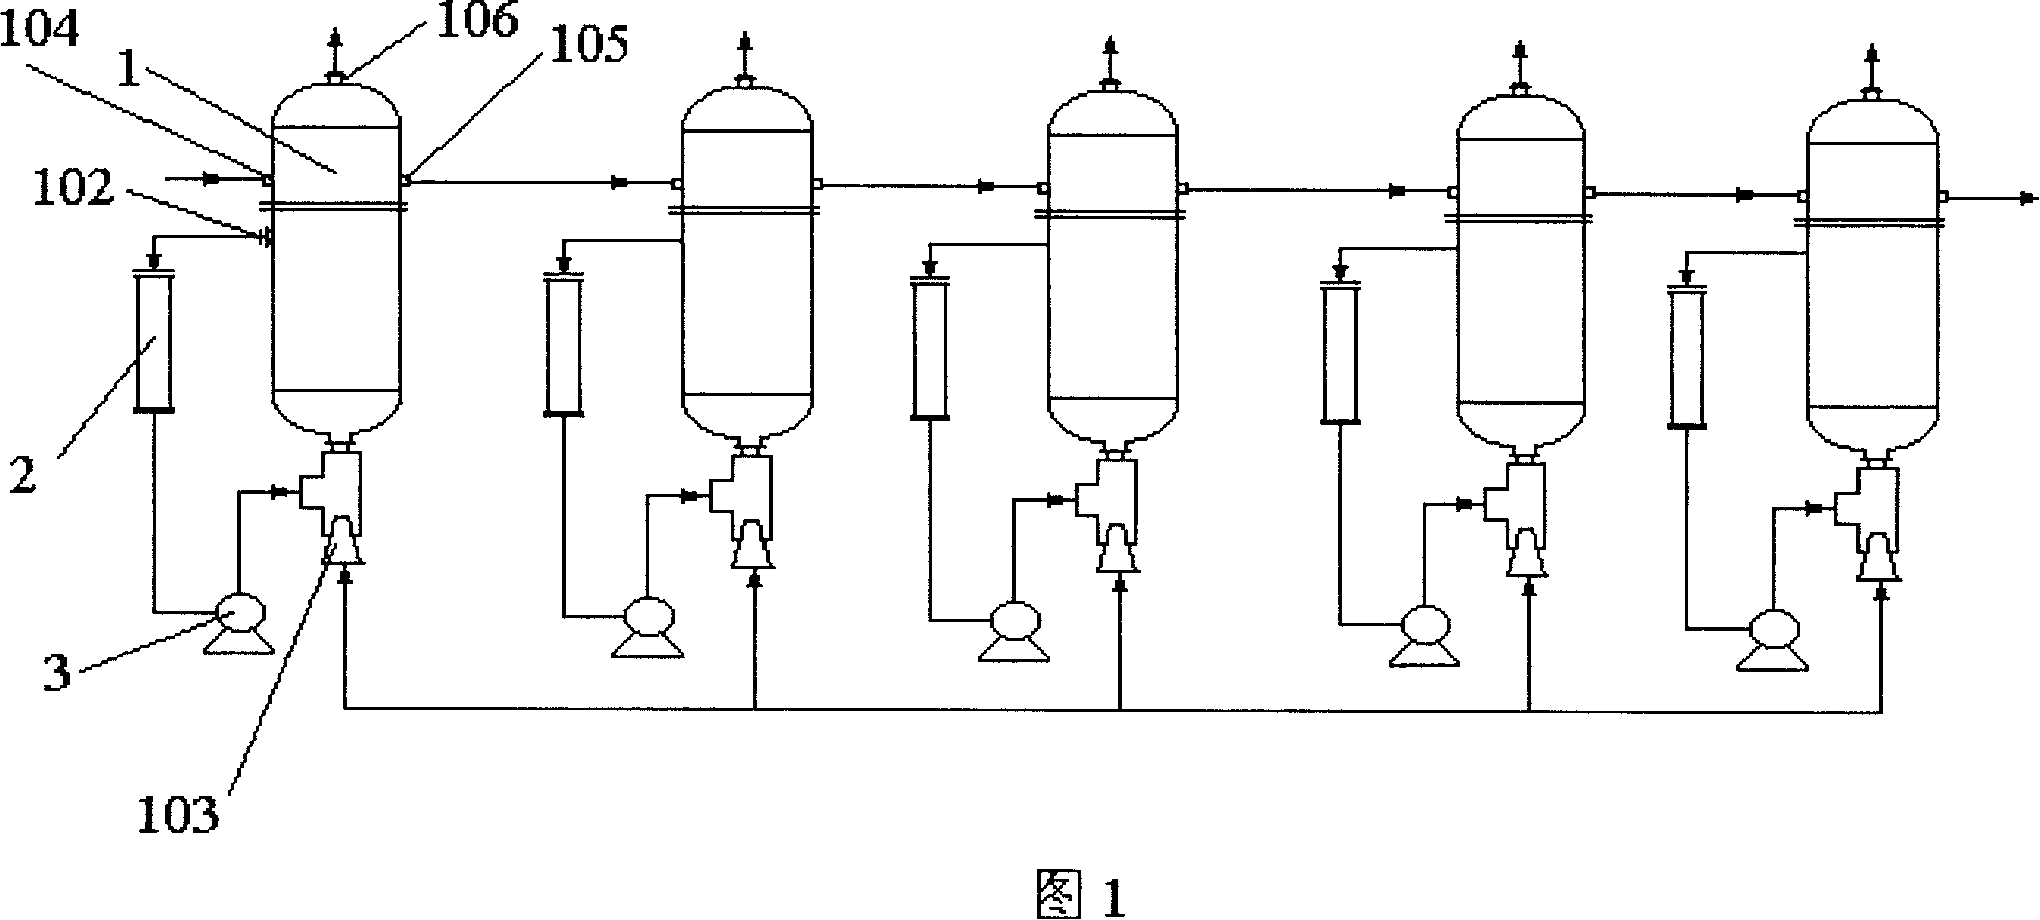 Continuous chloroparaffin production apparatus